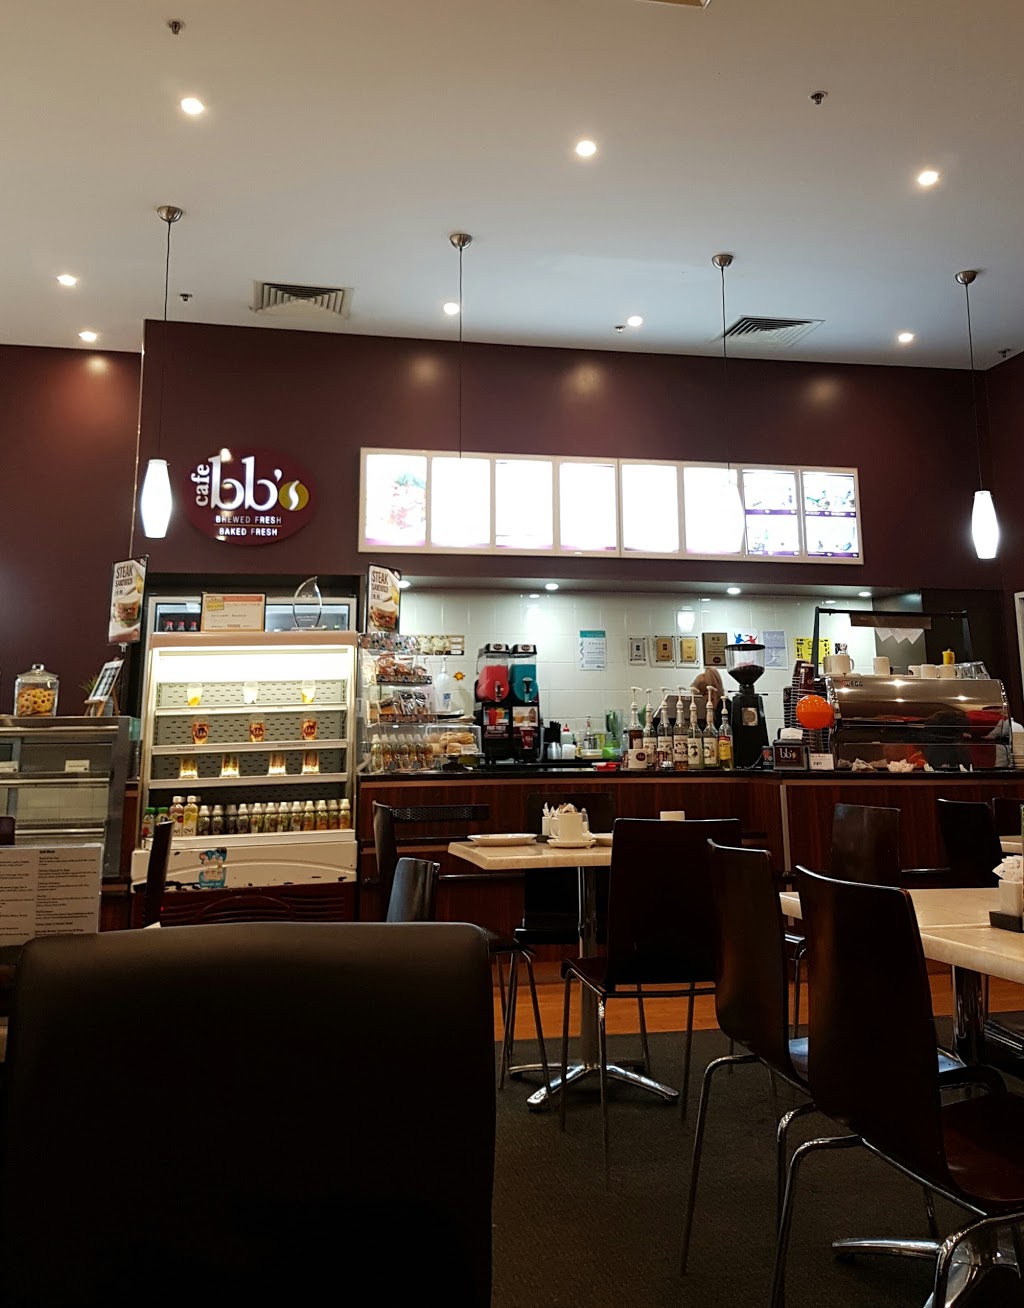 Rubrents cafe | cafe | Shop58/108 Commercial Rd, Seaford SA 5169, Australia | 0883270688 OR +61 8 8327 0688